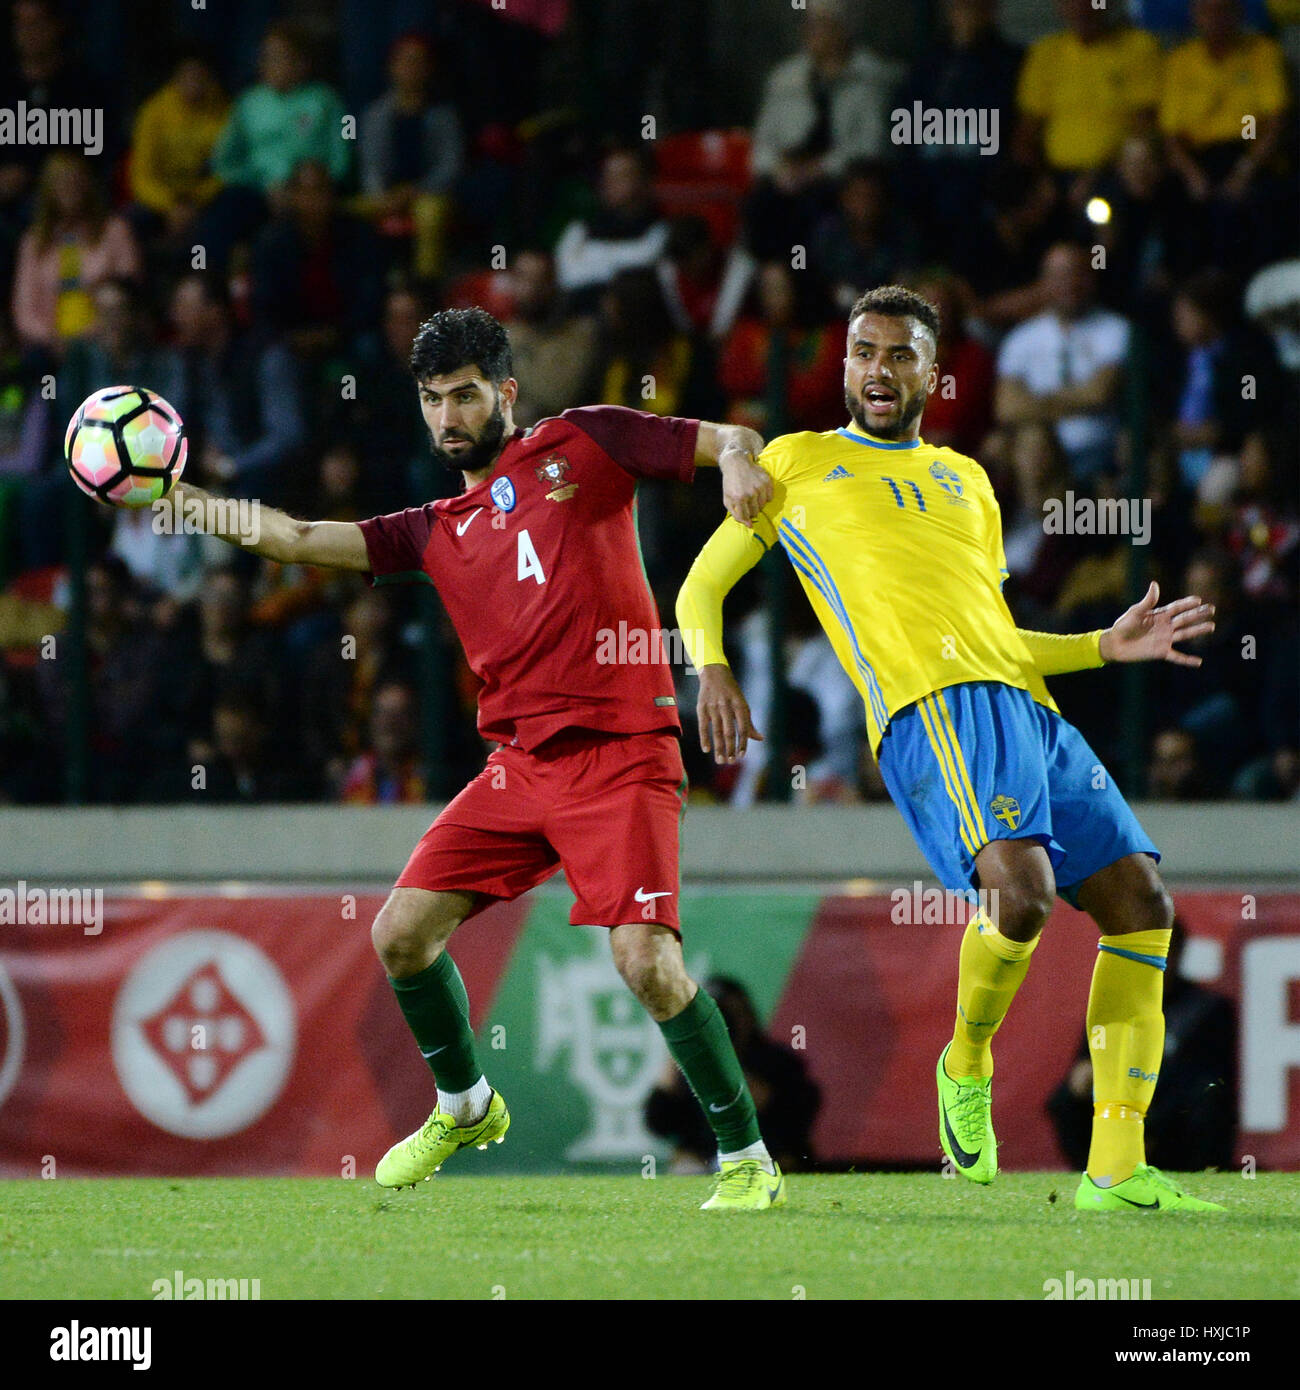 Funchal, Portugal. 28th Mar, 2017. Portugal's Luis Neto (L) vies with Kiese Thelin of Sweden during an international friendly soccer match between Portugal and Sweden at Barreiros Stadium in Funchal, Portugal, on March 28, 2017. Portugal lost 2-3. Credit: Joana Sousa/Xinhua/Alamy Live News Stock Photo